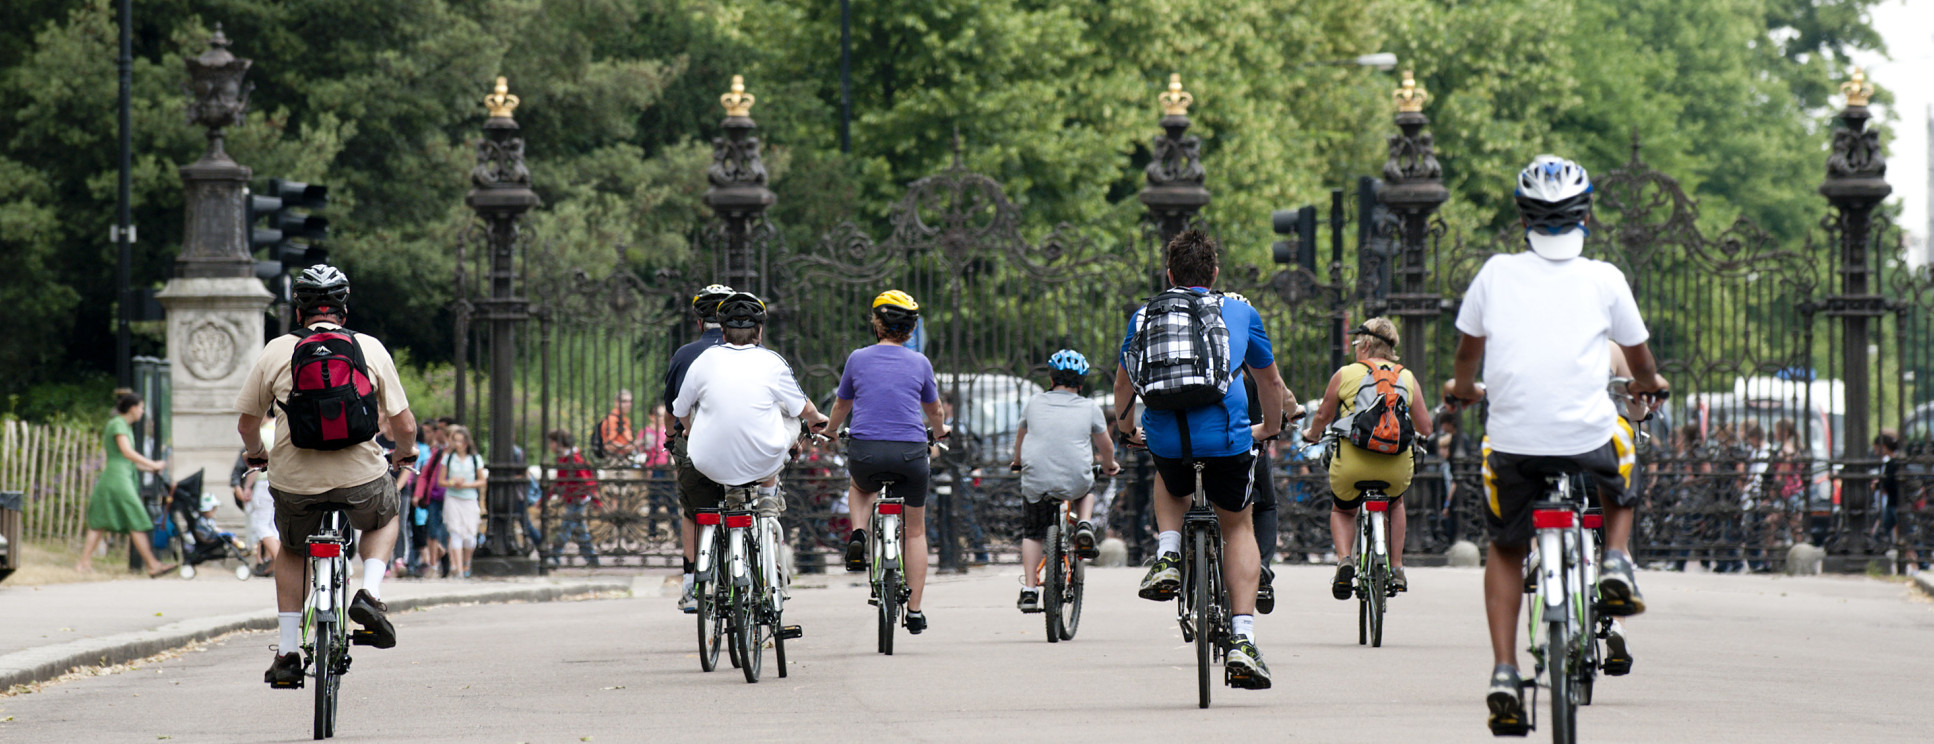 Cyclists in Hyde Park